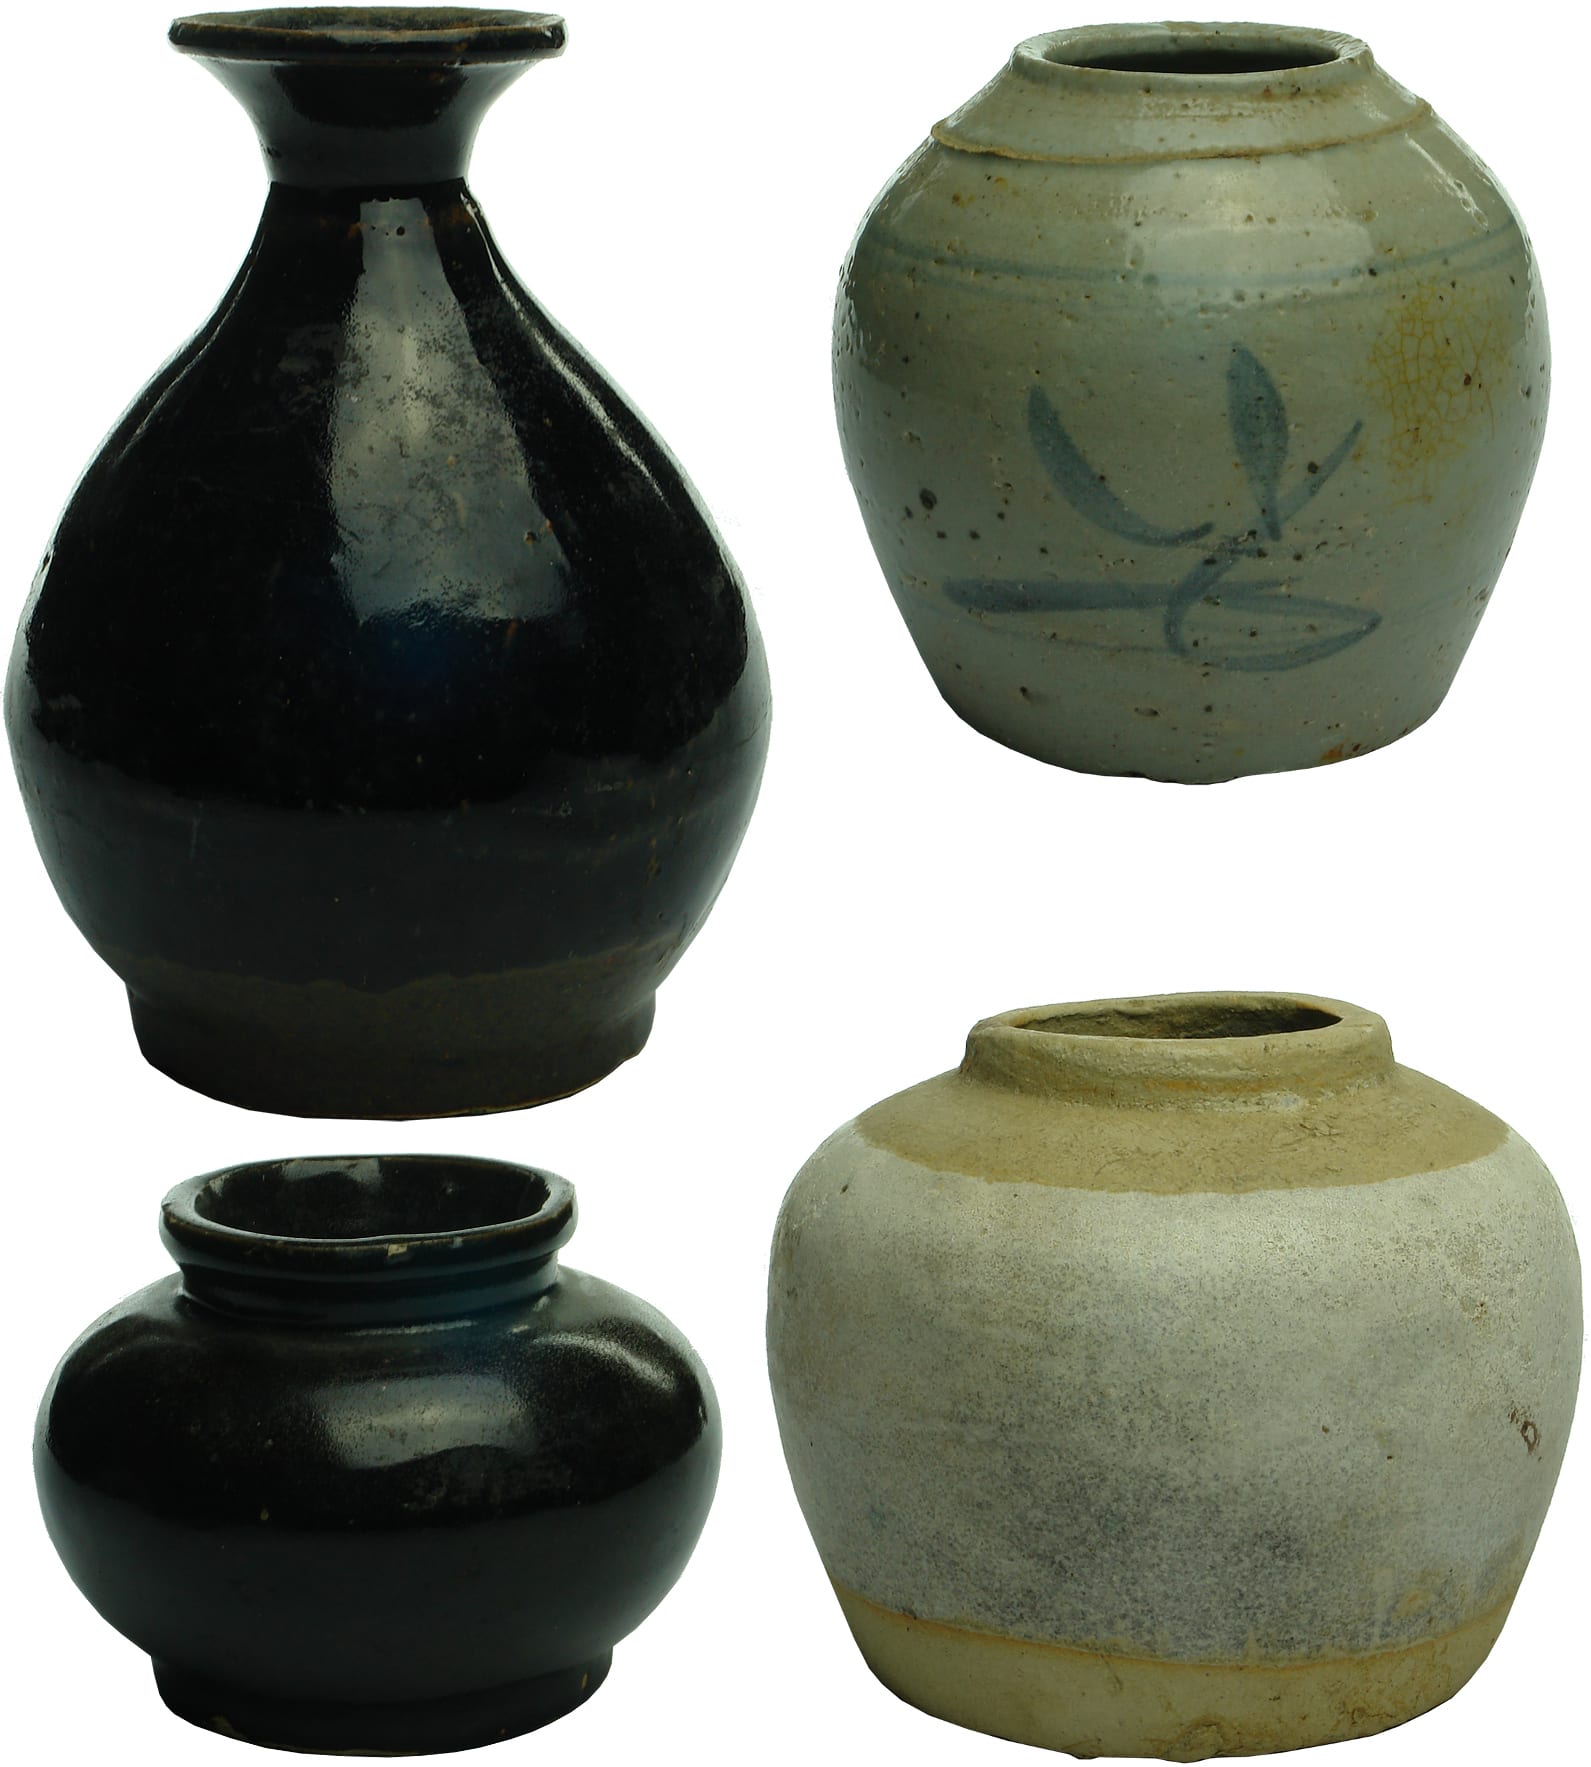 Antique Chinese Pottery Jars